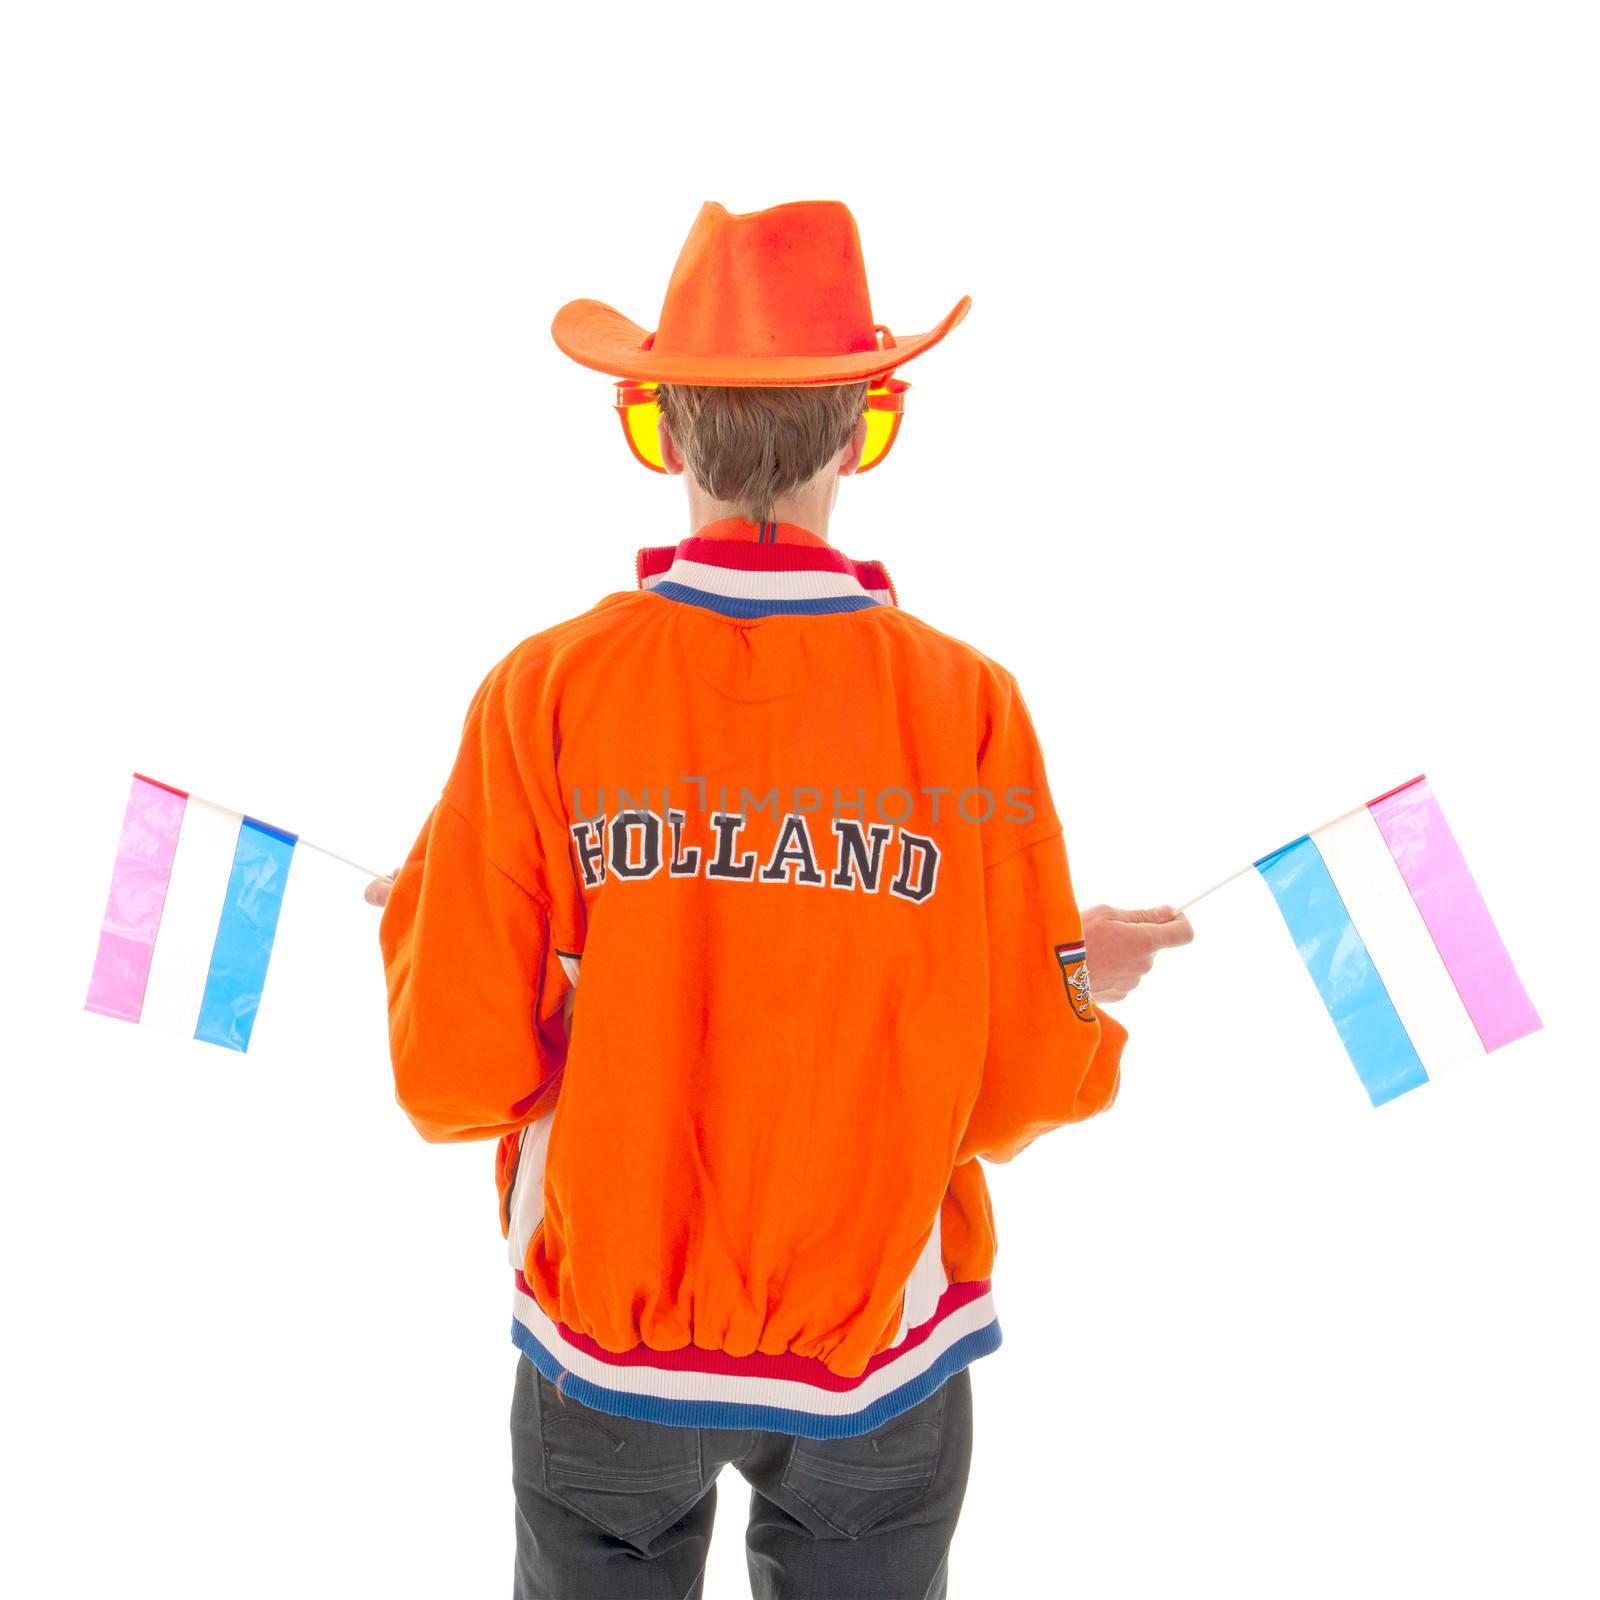 a boy ready for the world championship, to support the dutch soccer team